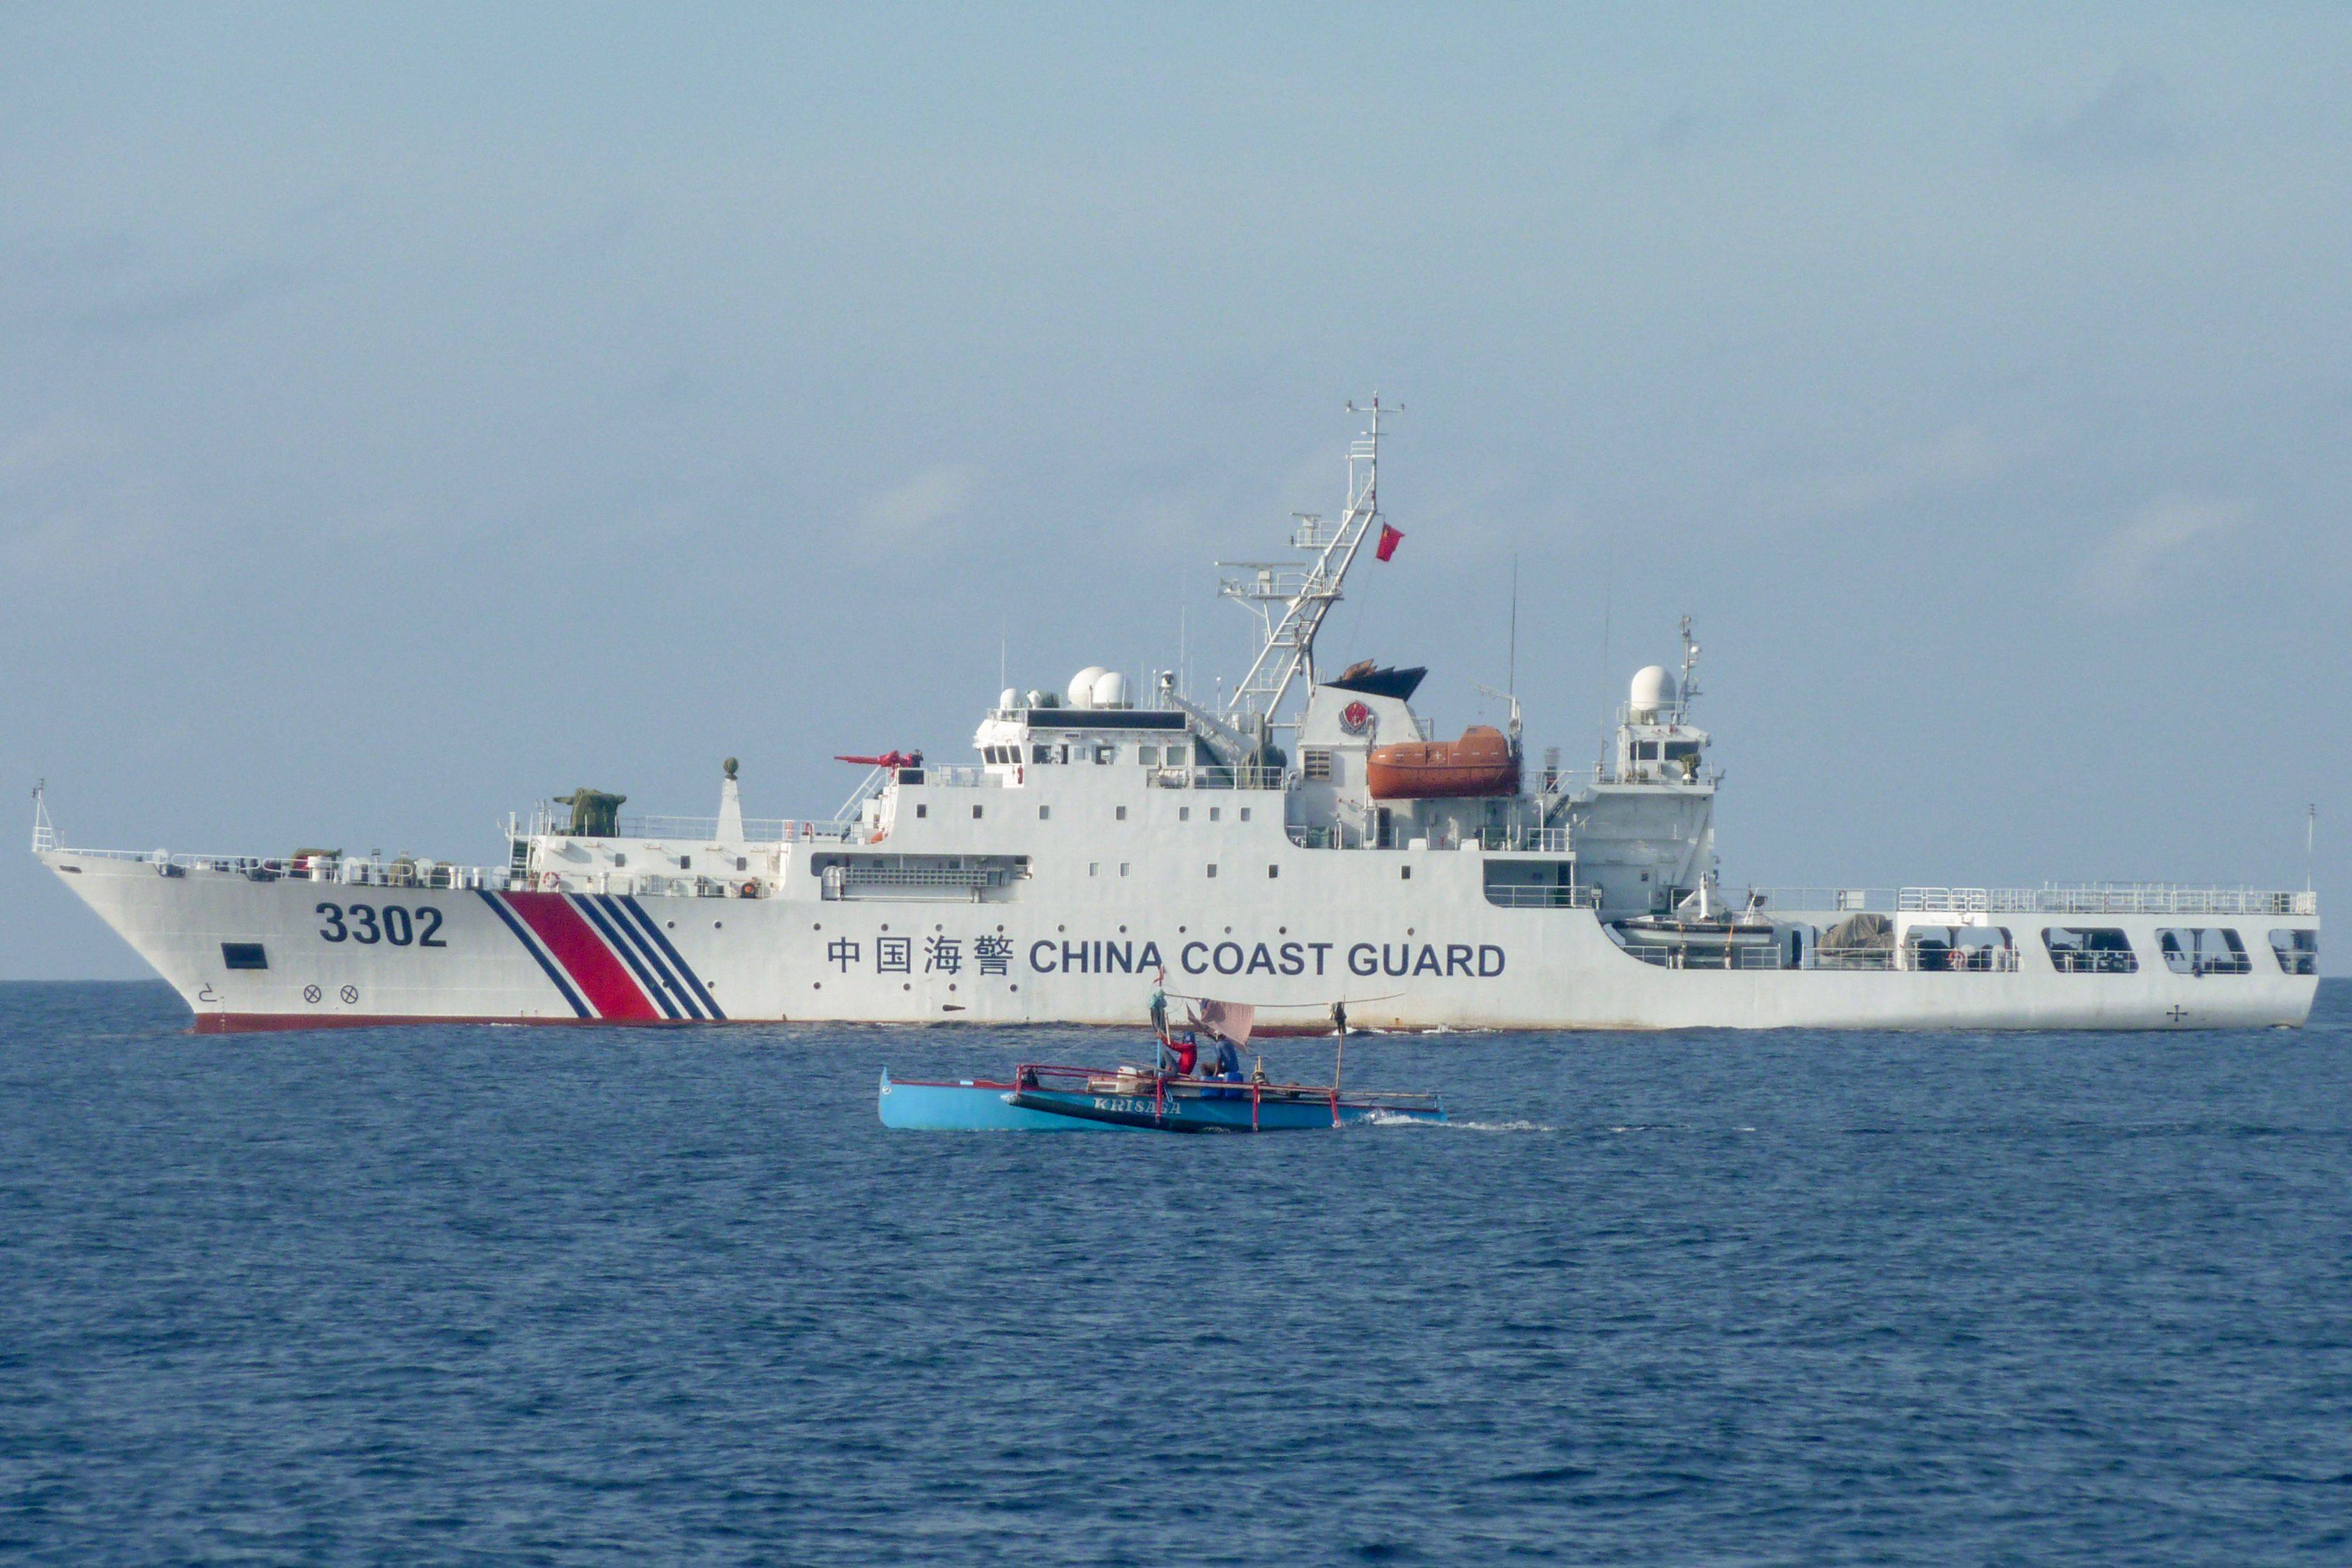 Filipino fishermen sail past a Chinese coastguard ship in the Scarborough Shoal in the South China Sea on February 5. Photo: AFP